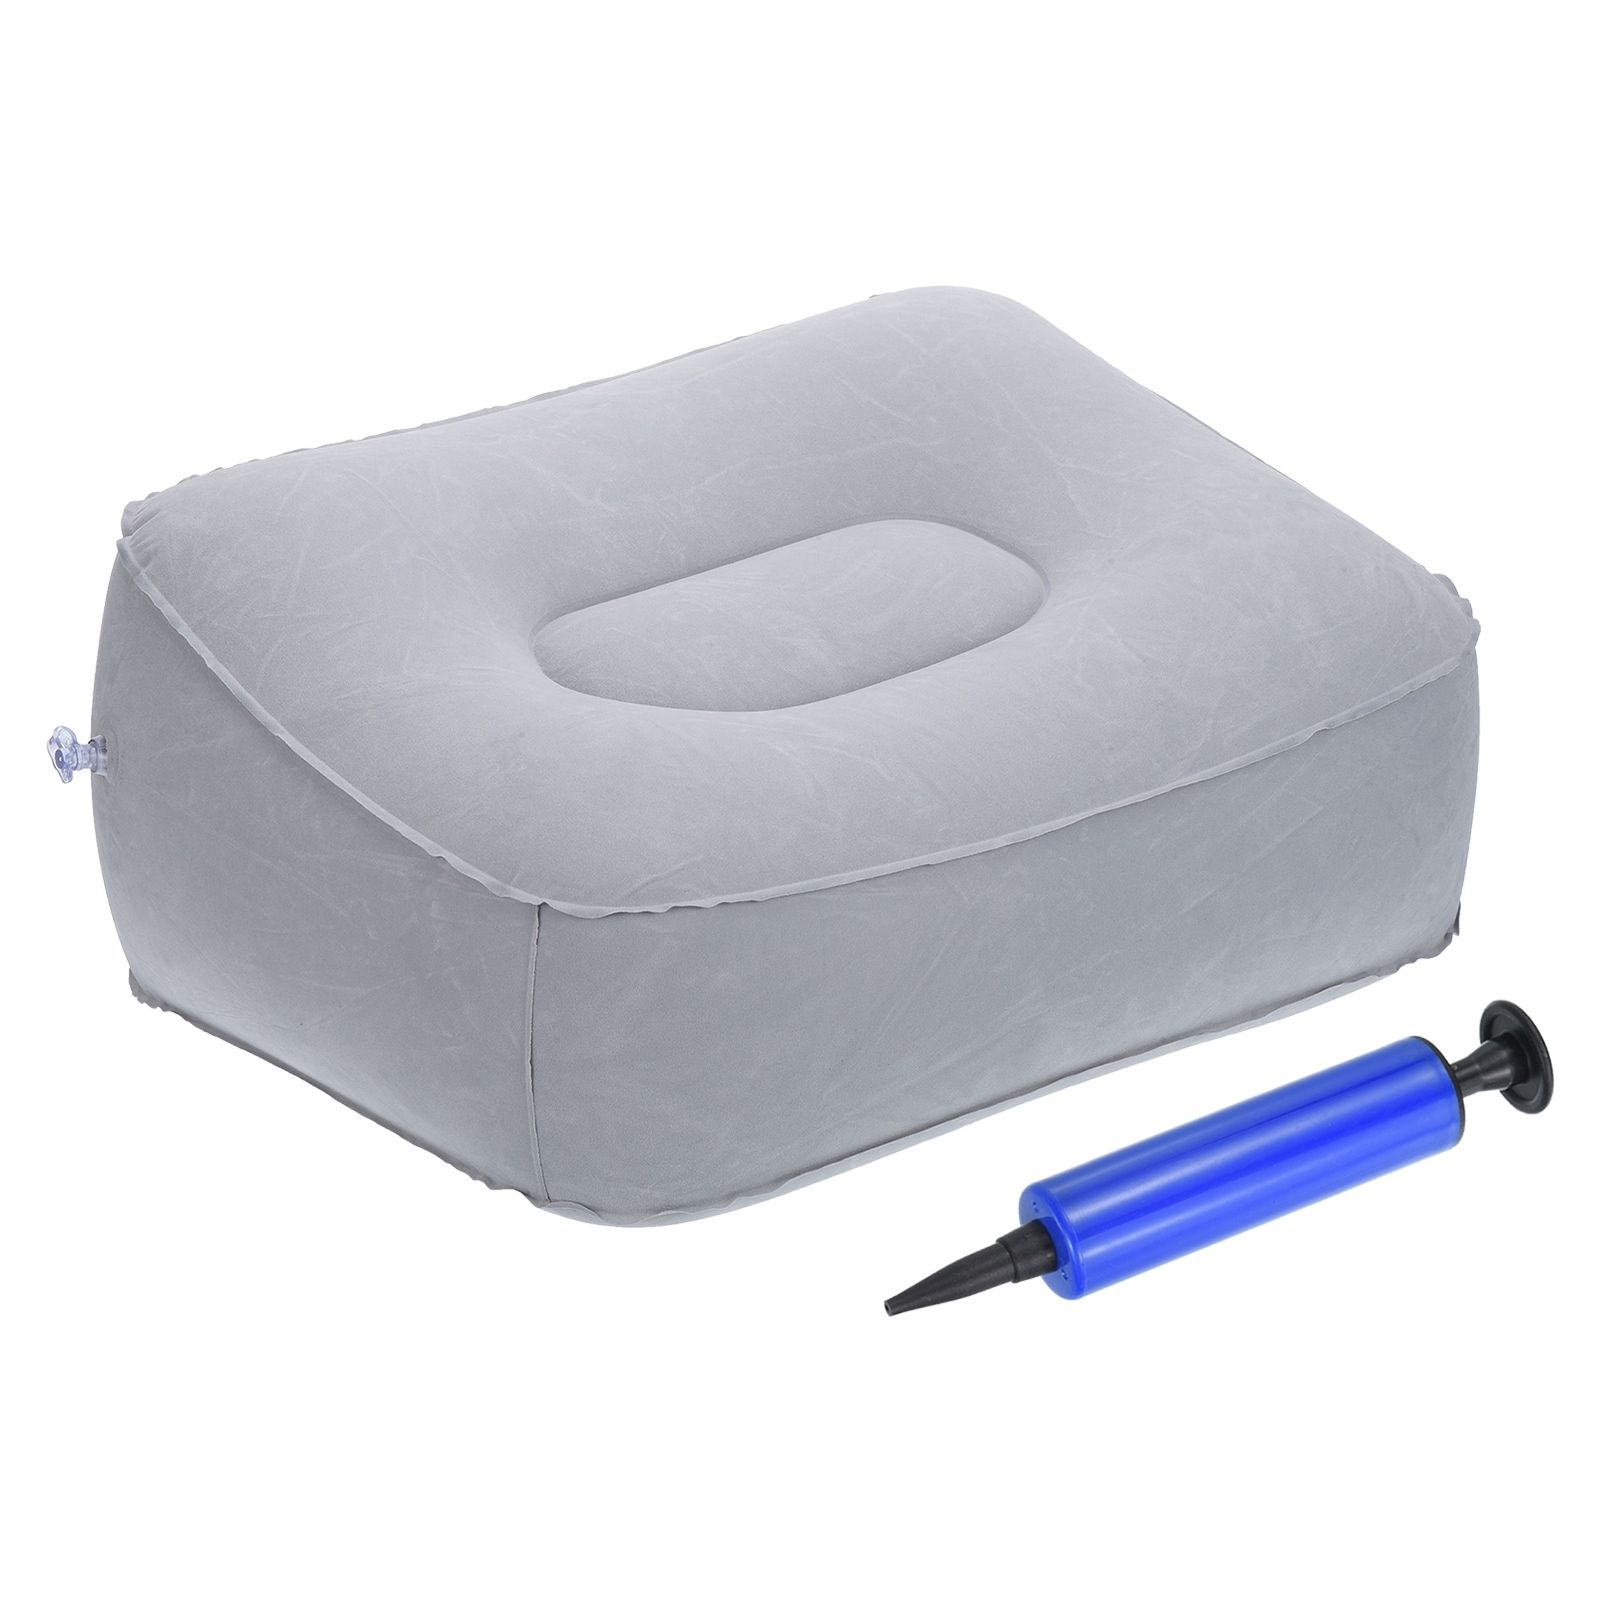 https://ak1.ostkcdn.com/images/products/is/images/direct/f4b78cc6fc372b8bba024905ae9378d003f2dab4/Travel-Foot-Rest-Pillow%2C-Inflatable-Foot-Rest-Mat-with-Air-Pump%2C-Gray.jpg